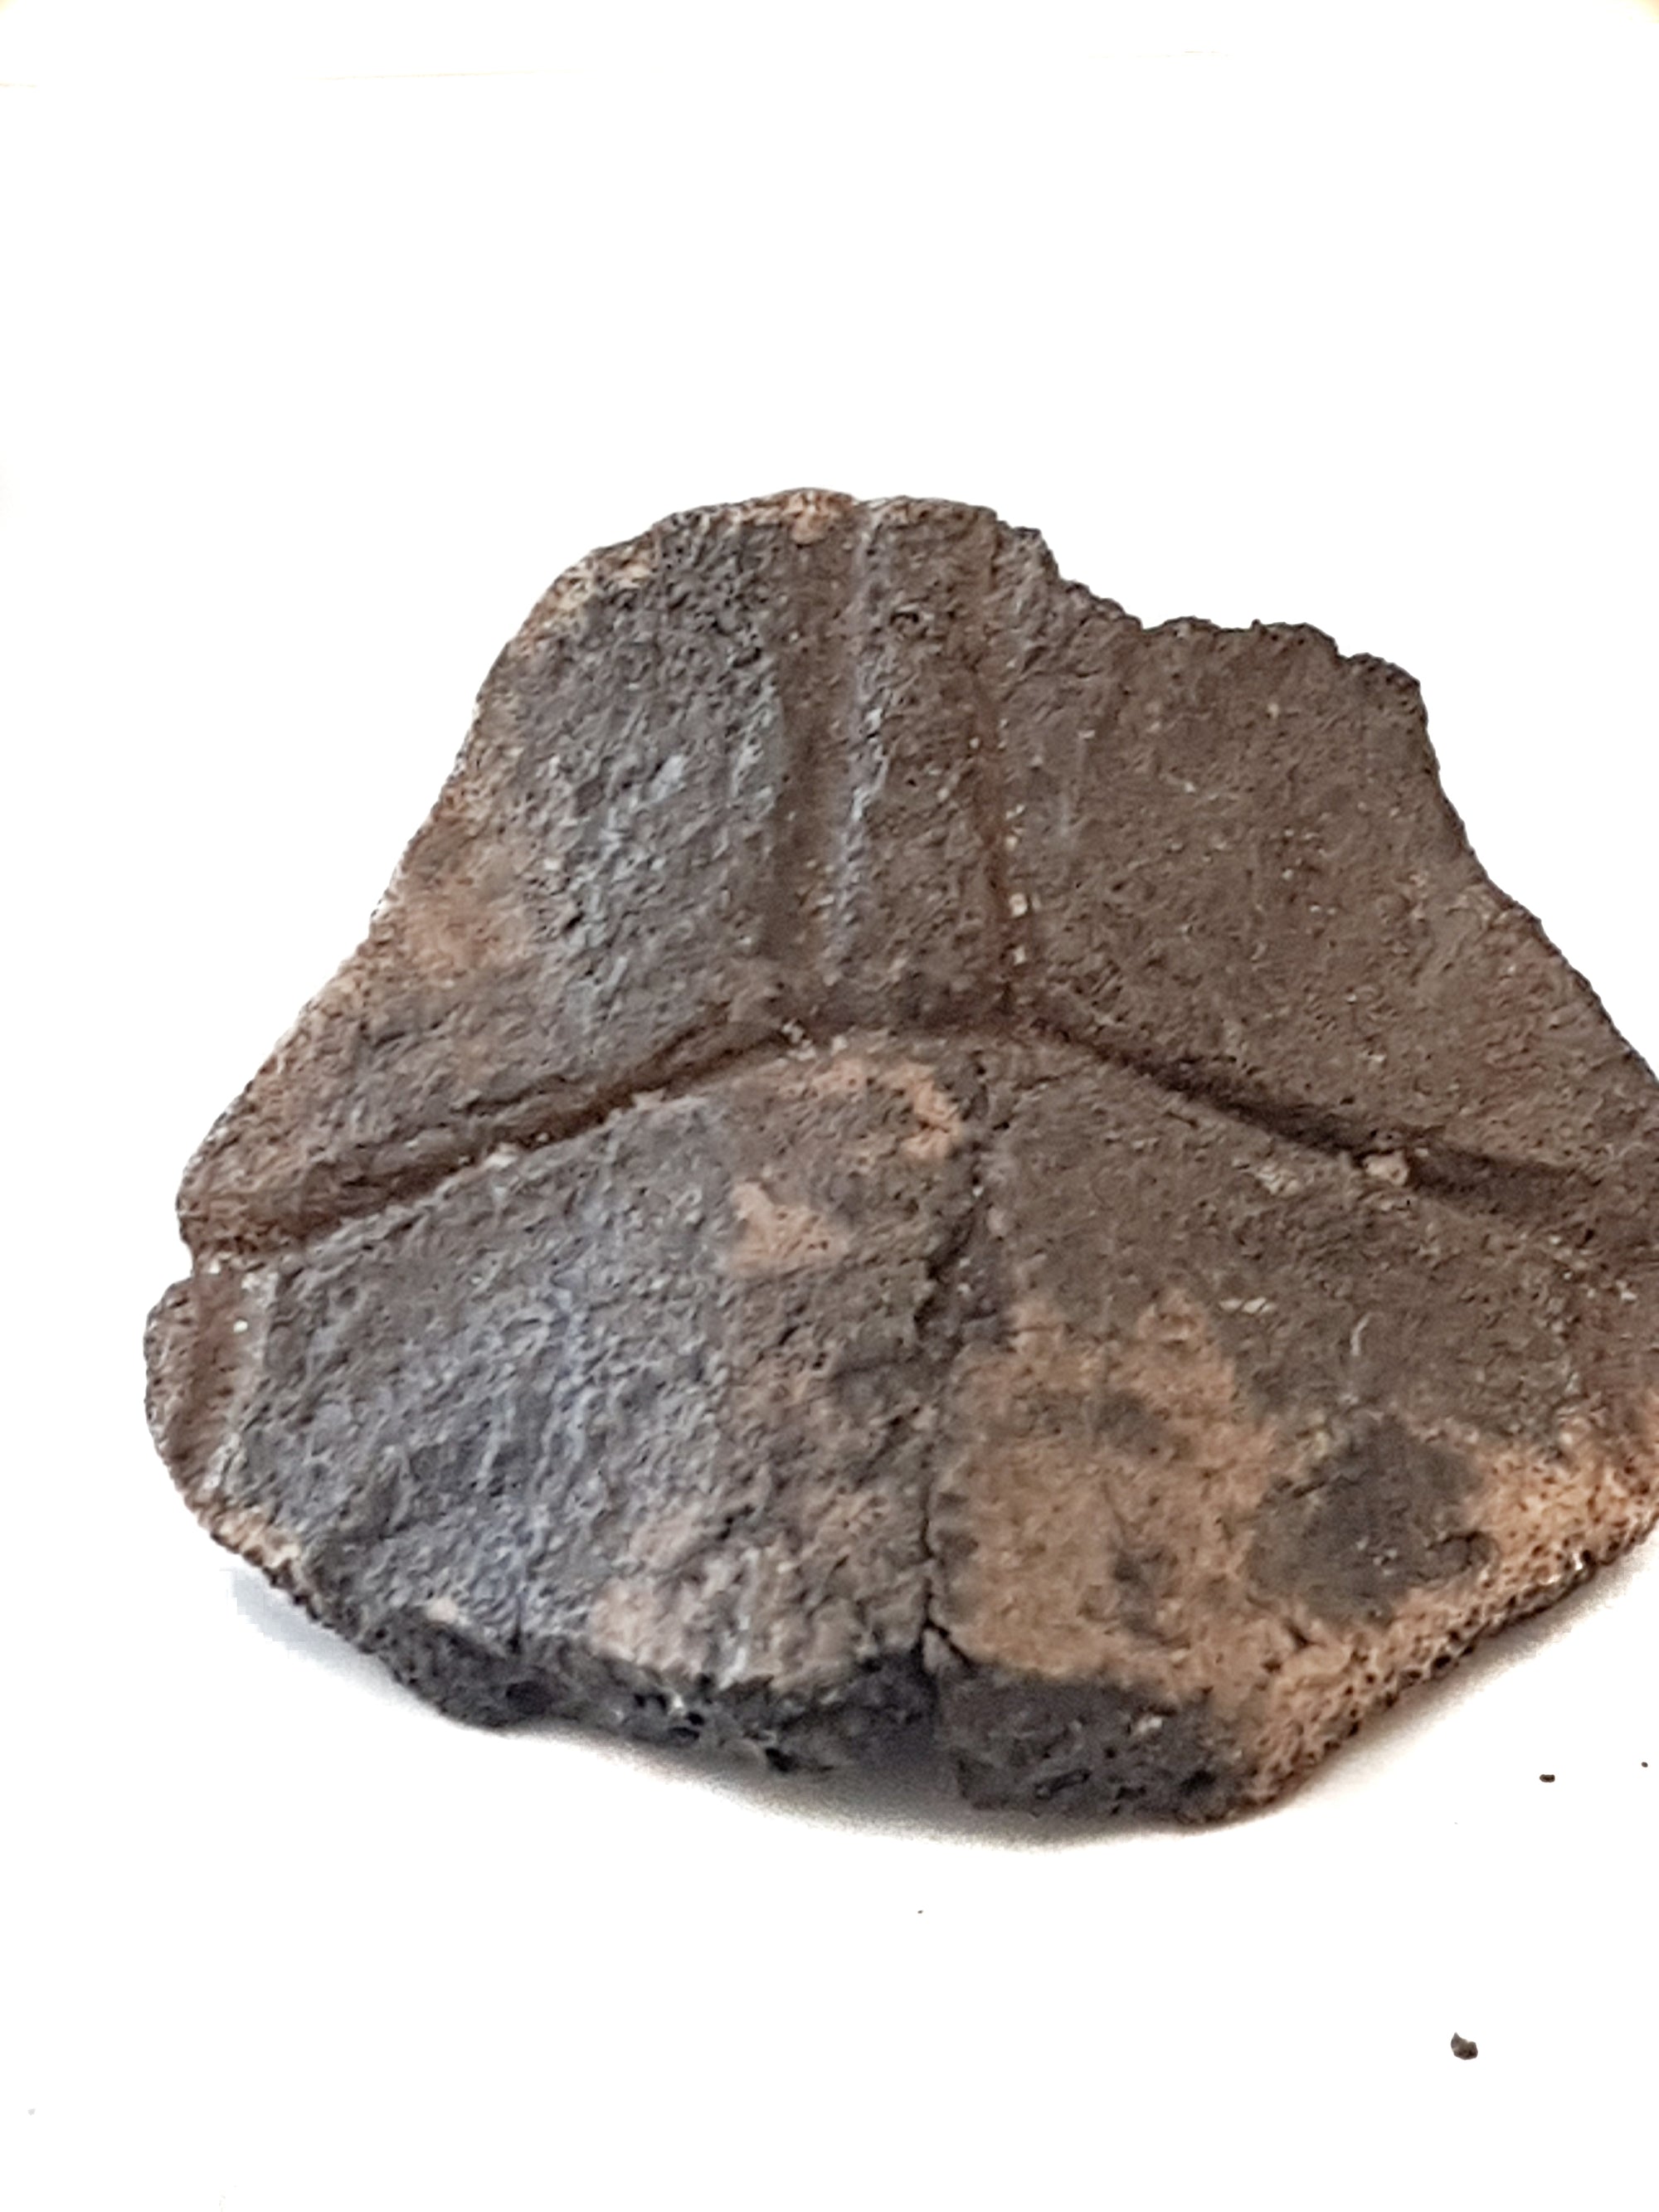 fragment of fossil turtle shell